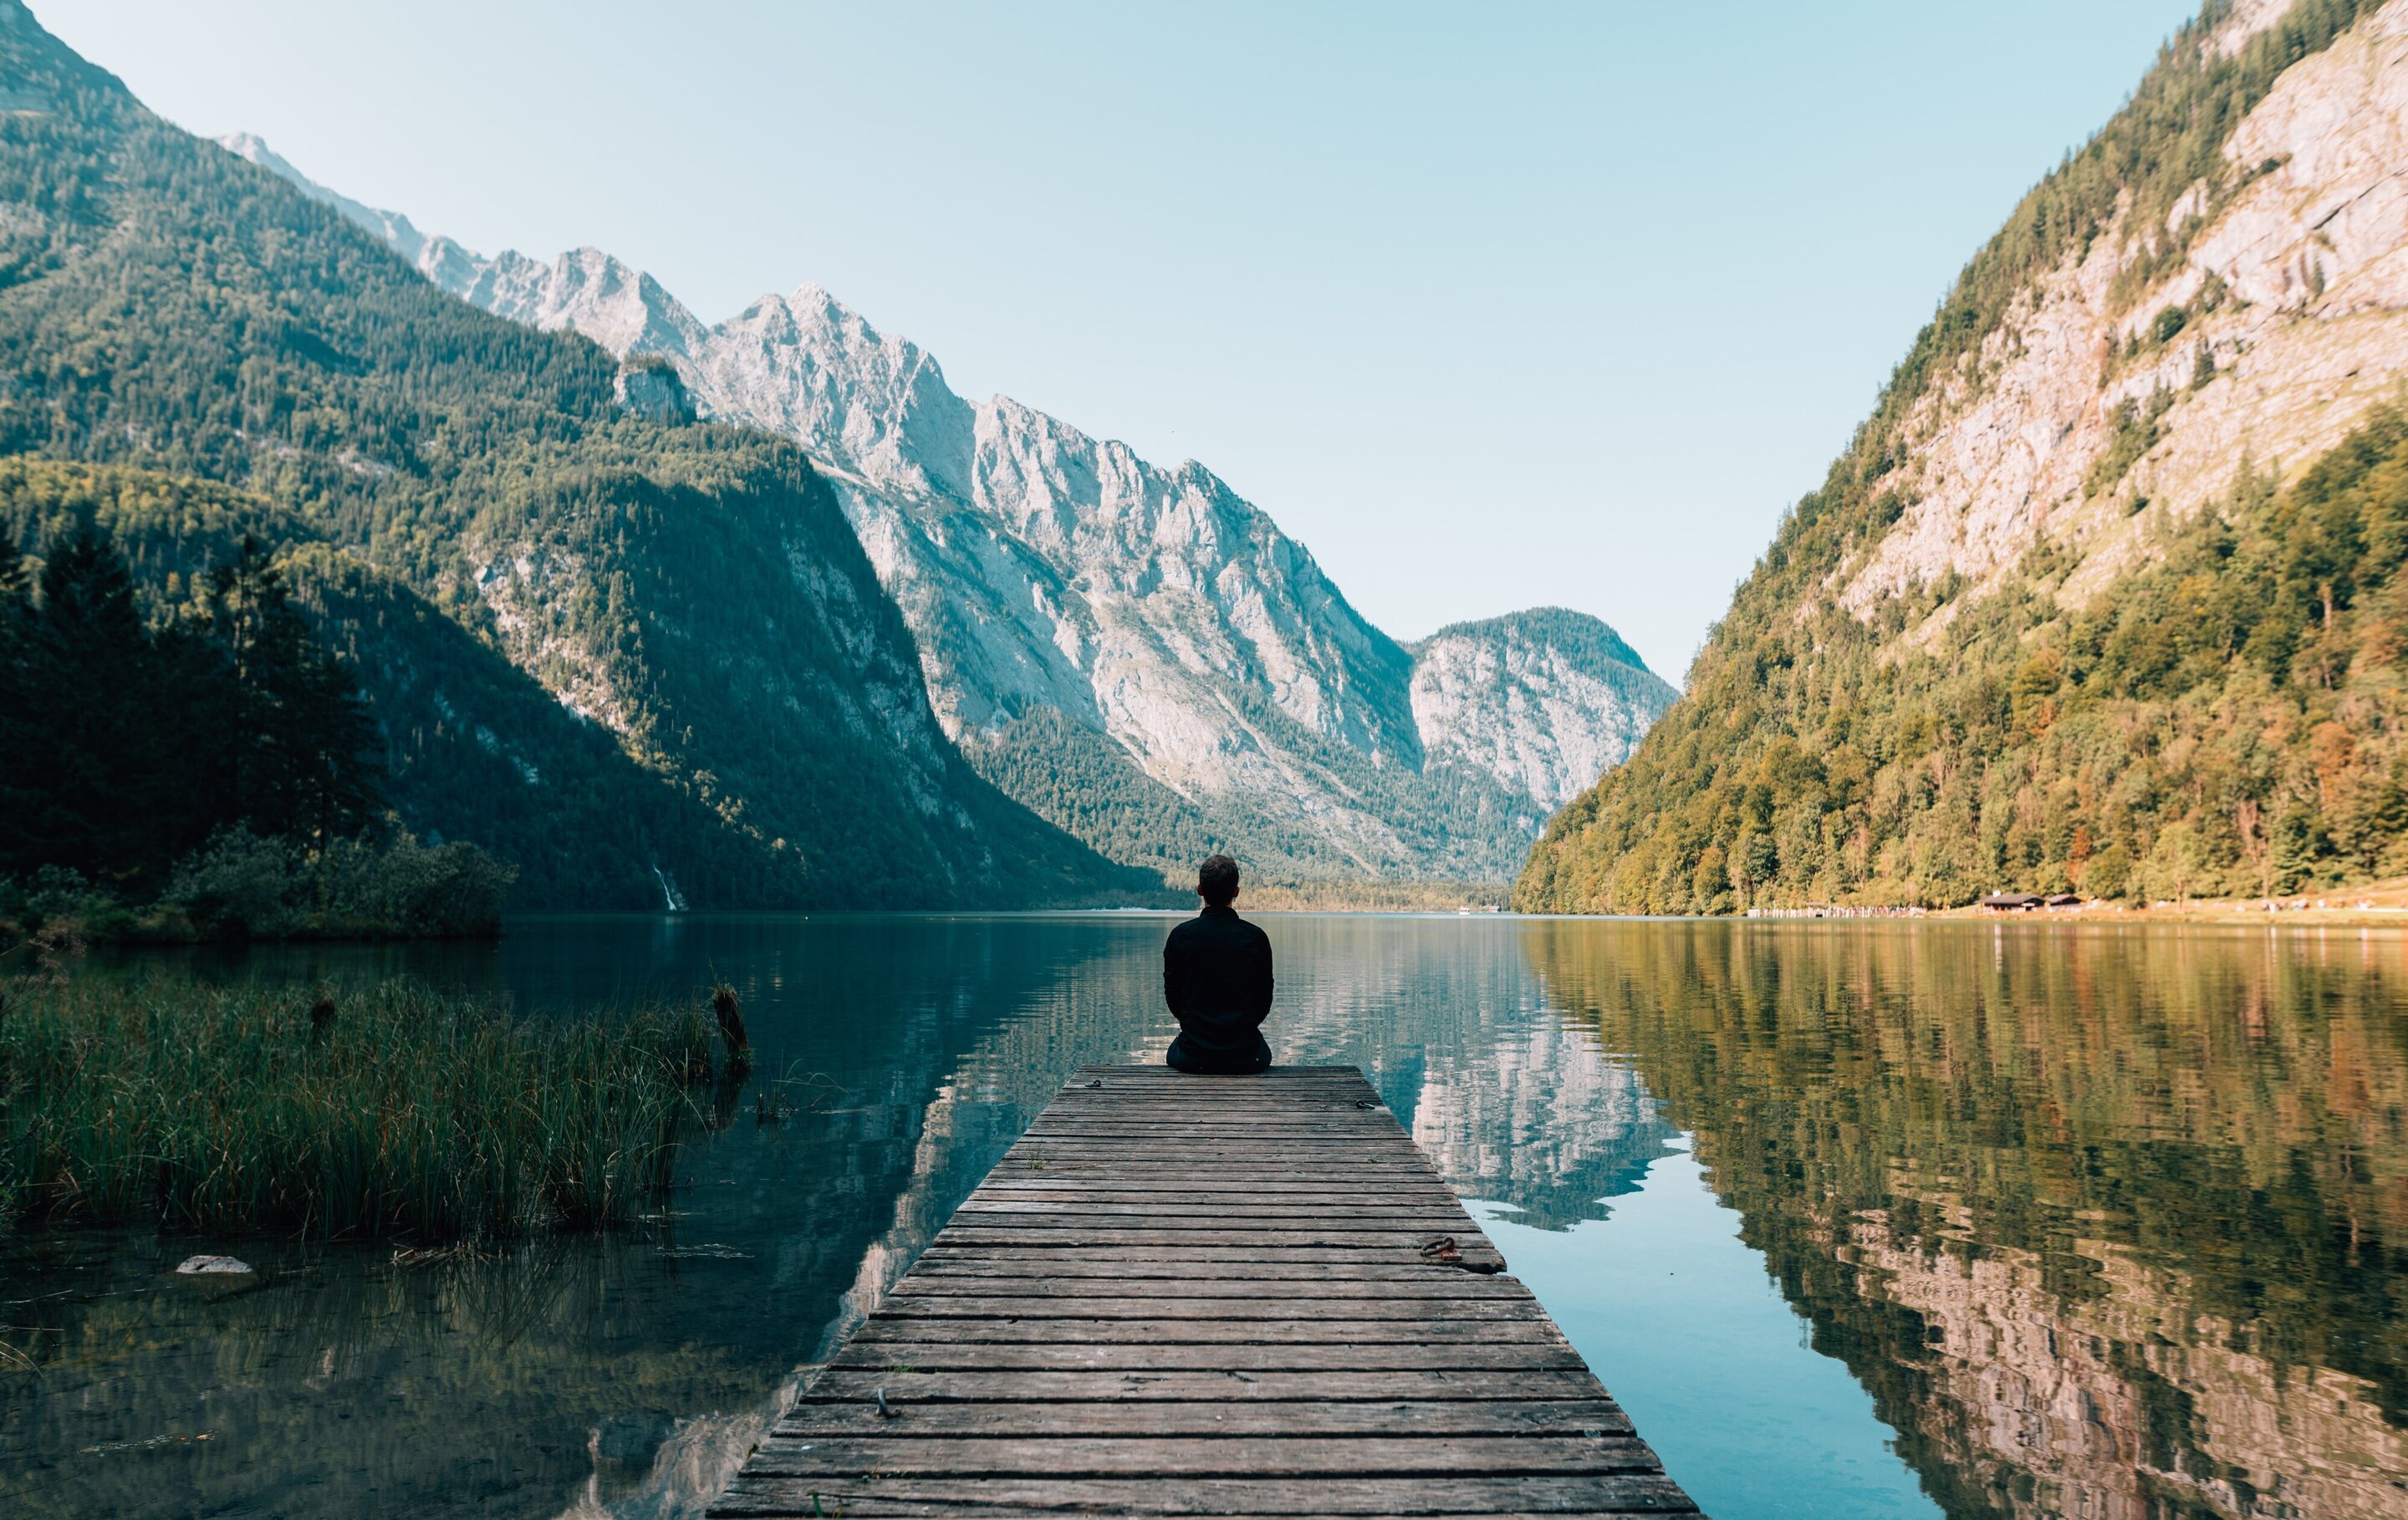 The Difference Between Mindfulness and Dispositional Mindfulness